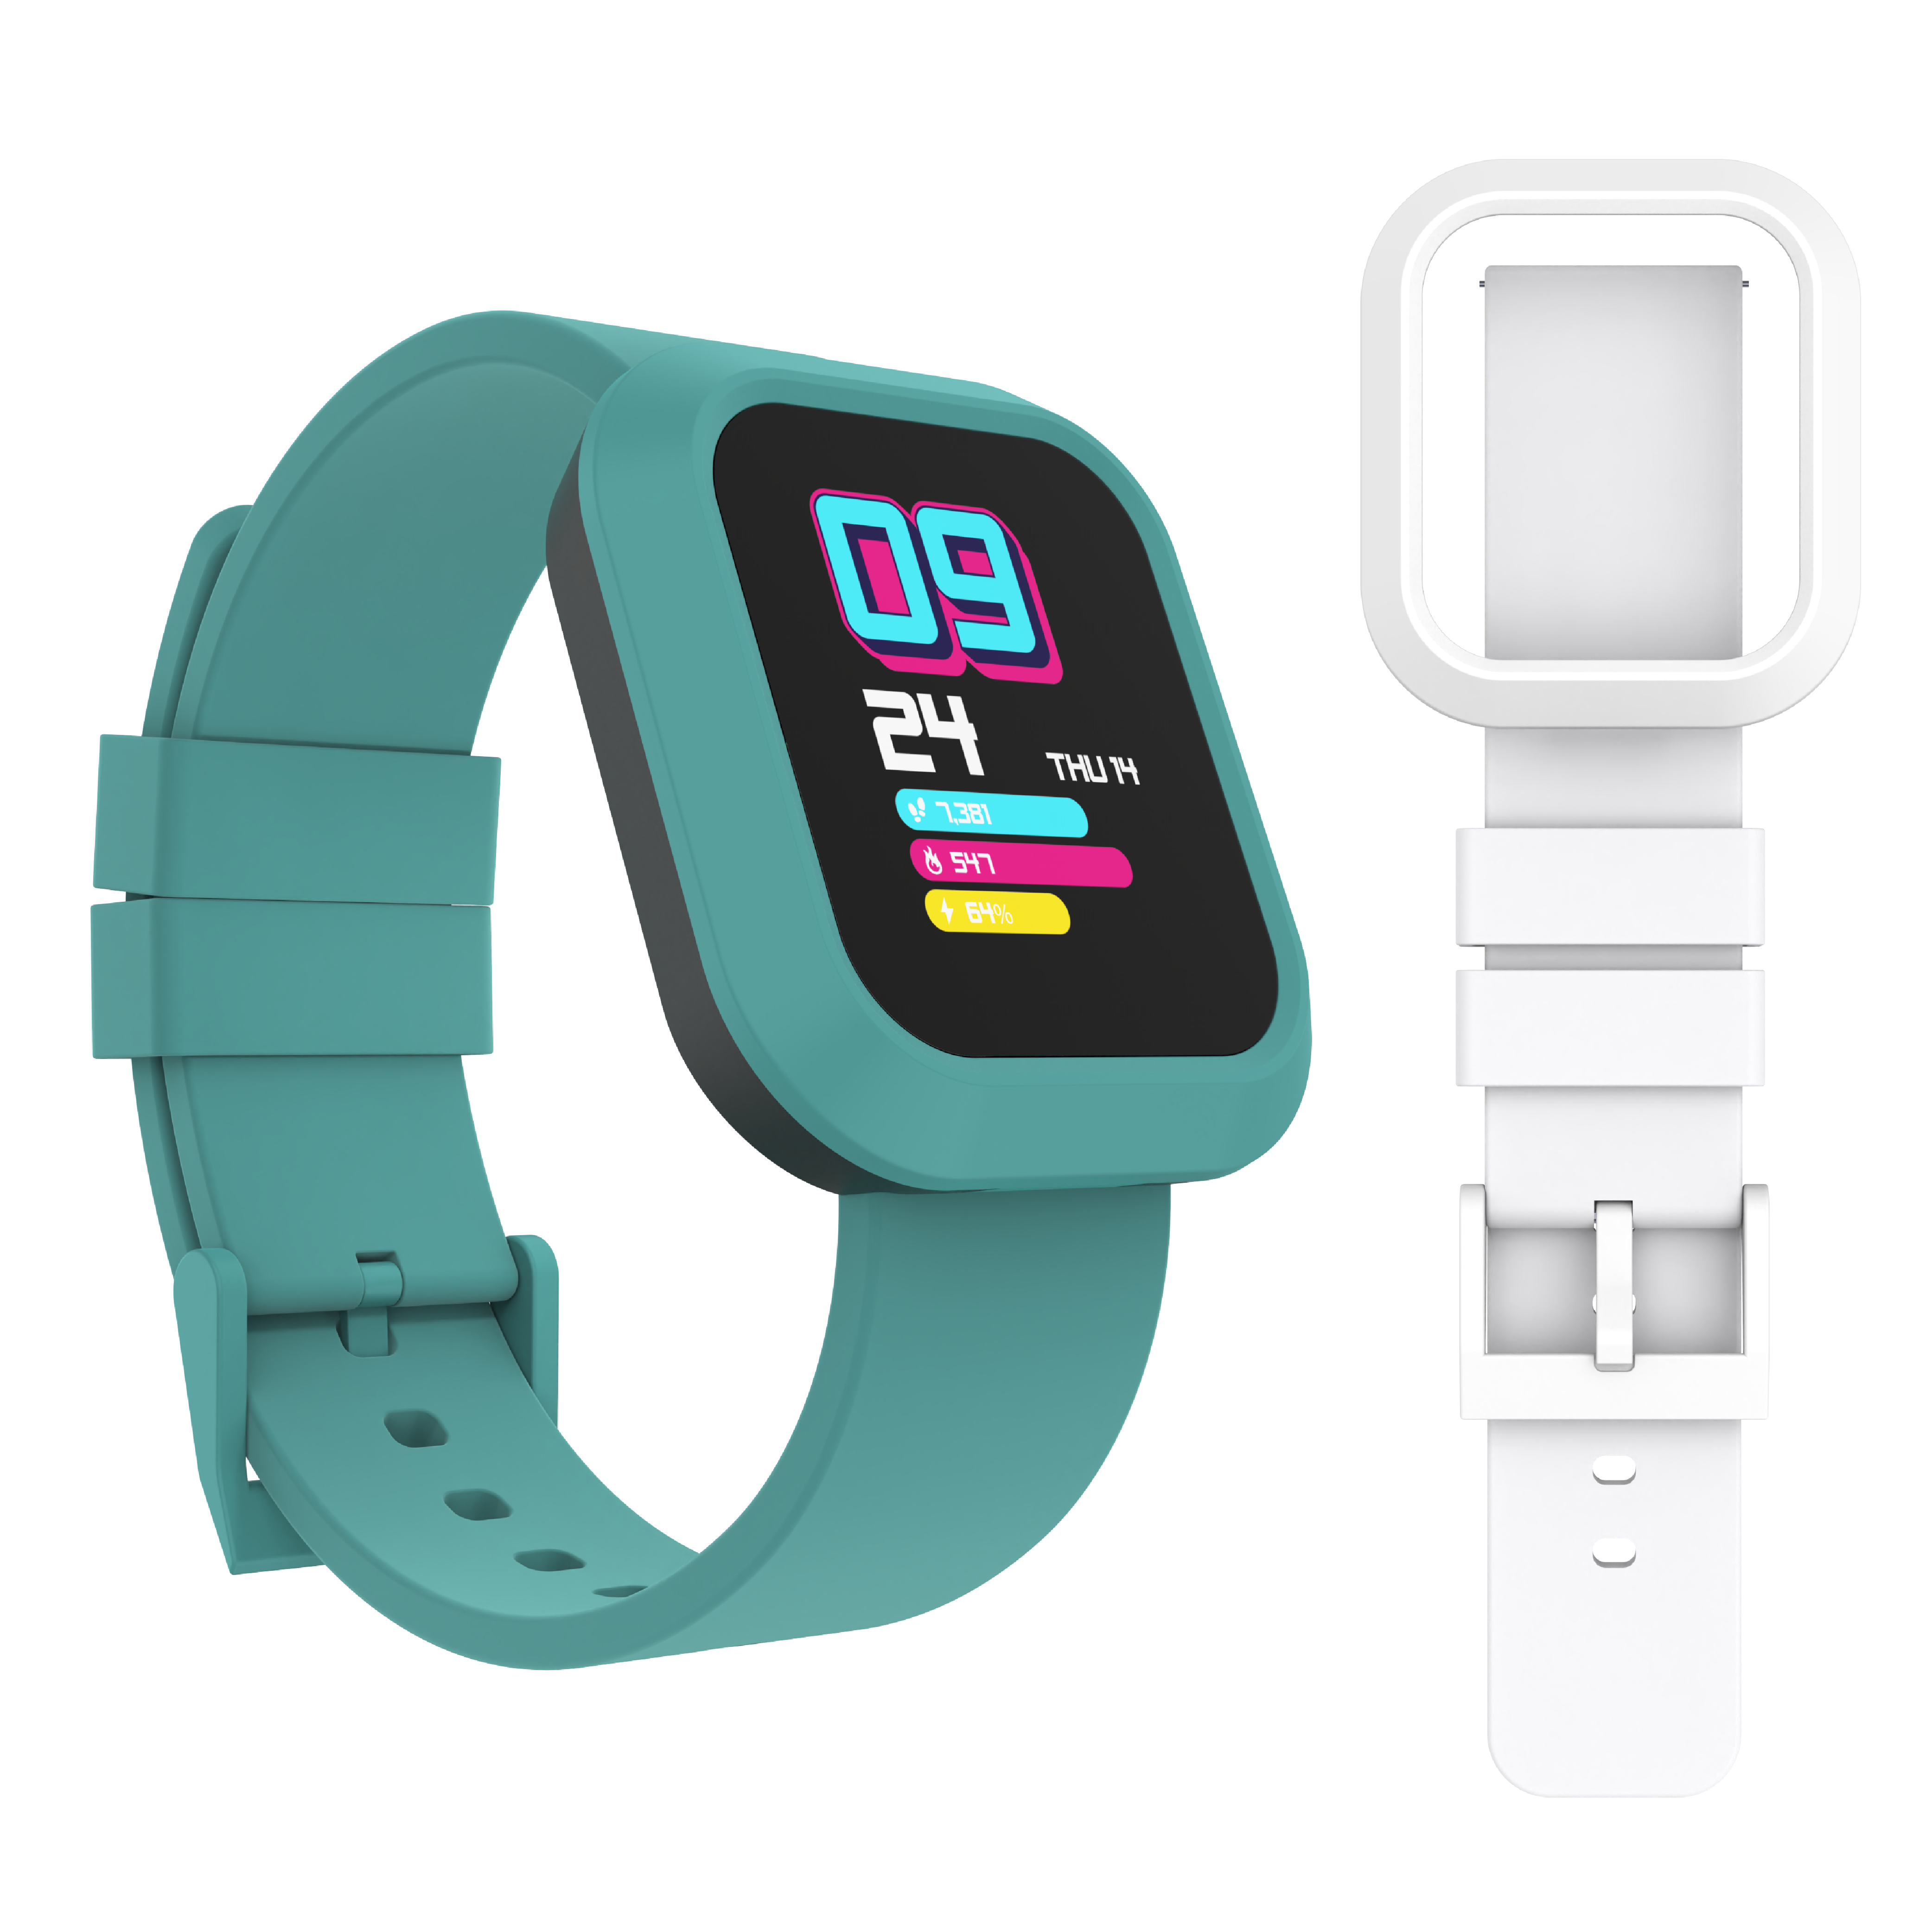 iTOUCH AIR 3 Smart Watch User Guide